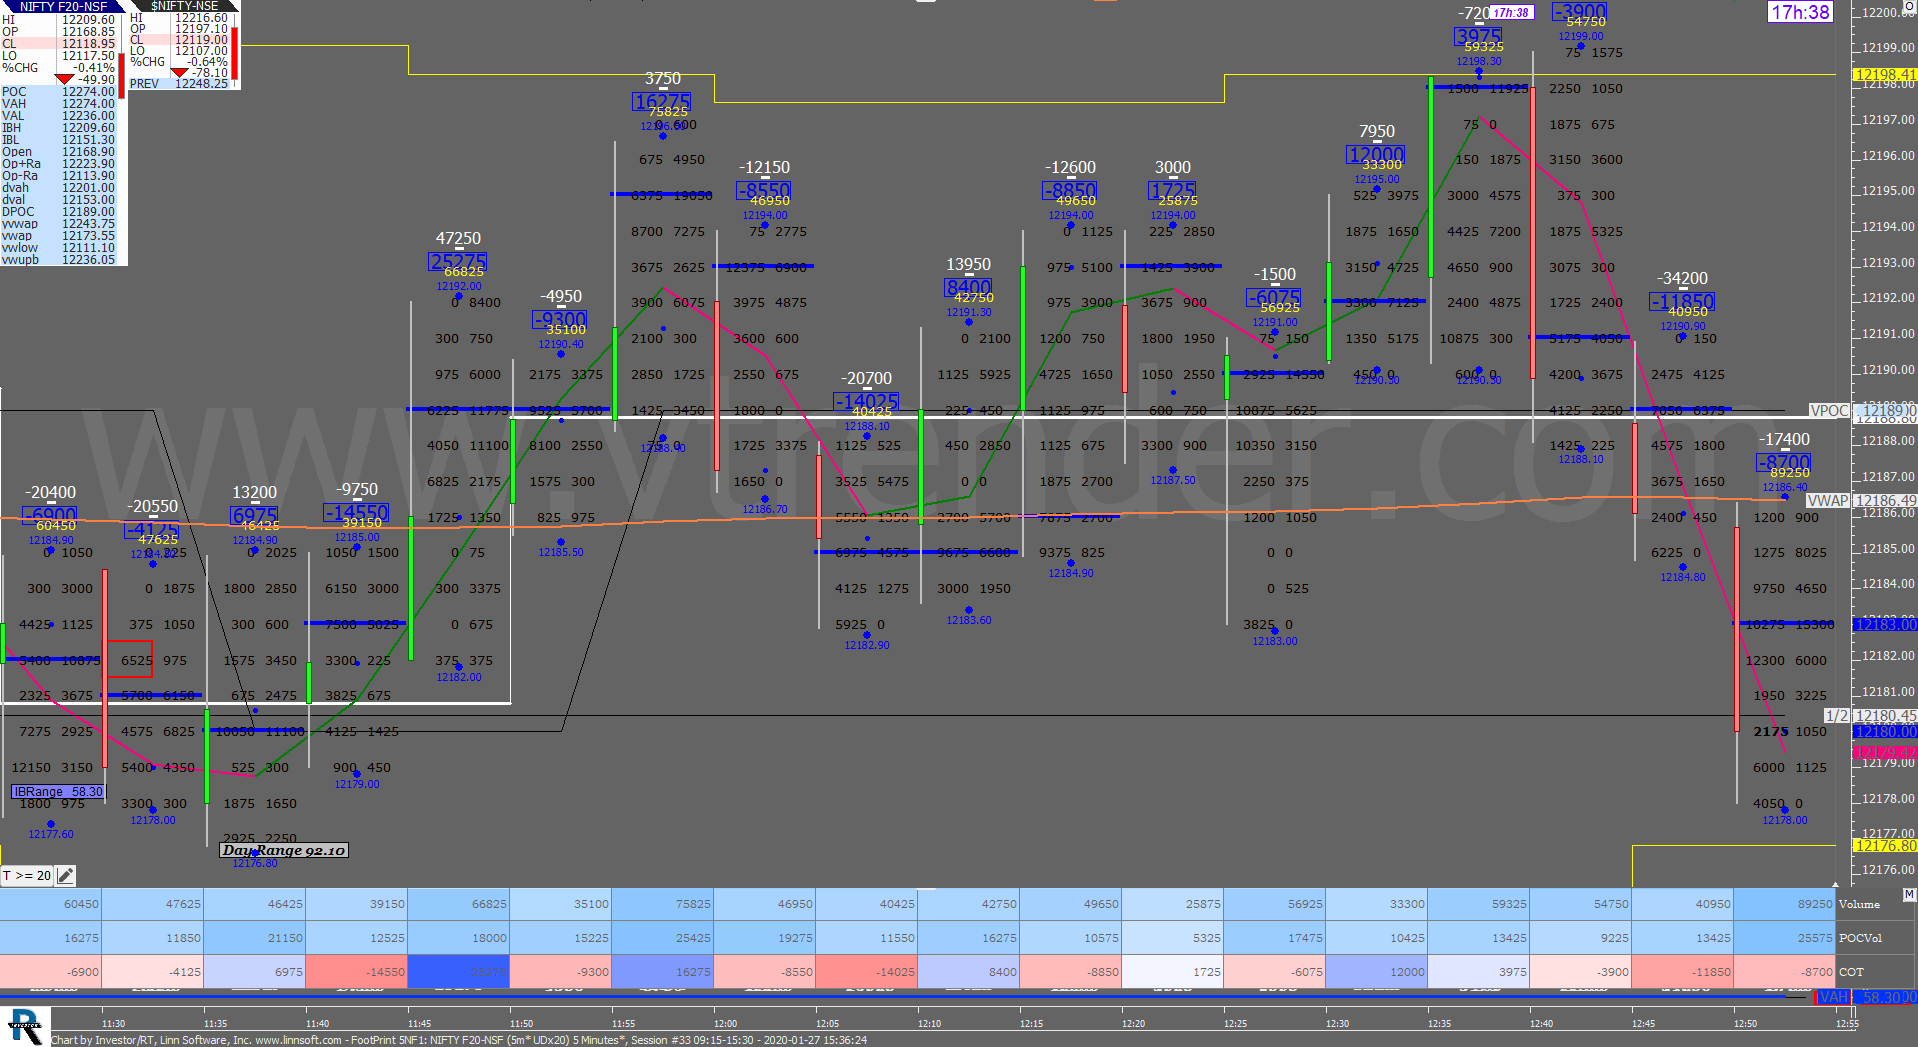 3 33 Order Flow Charts Dated 27Th Jan 2020 (5 Mins) Banknifty Futures, Day Trading, Intraday Trading, Intraday Trading Strategies, Nifty Futures, Order Flow Analysis, Support And Resistance, Trading Strategies, Volume Profile Trading